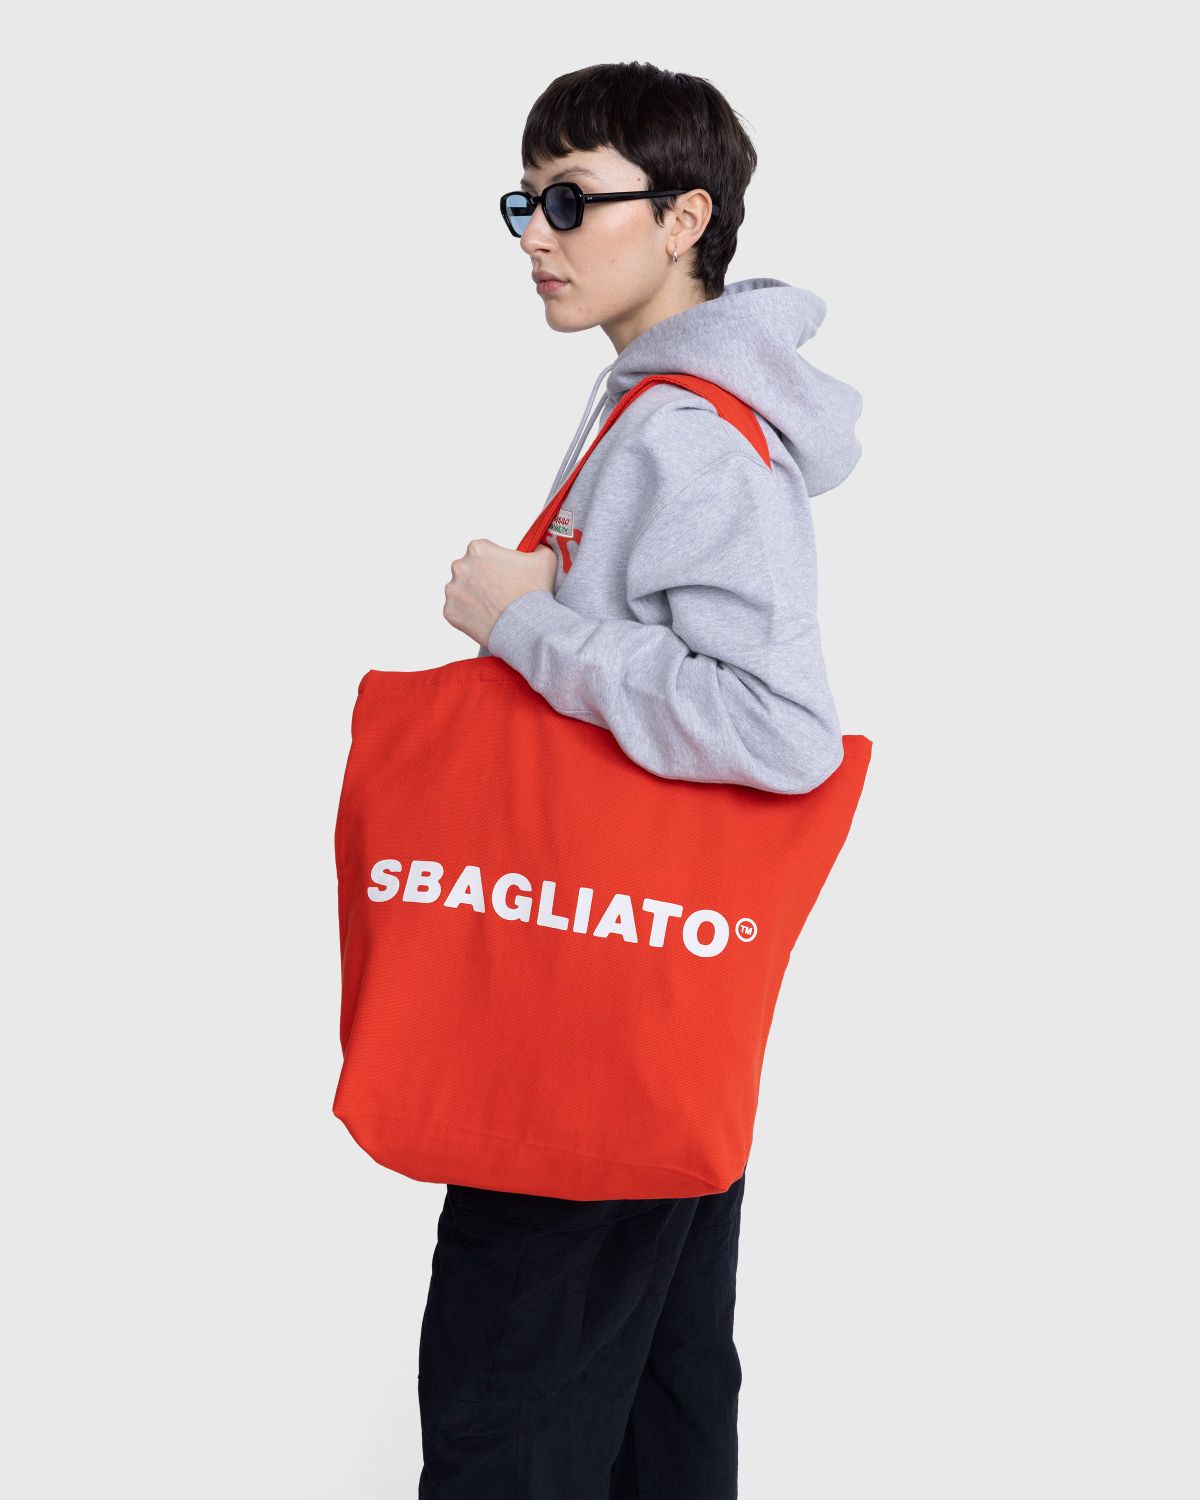 Bar Basso x Highsnobiety – Sbagliato Tote Bag Red - Bags - Red - Image 4